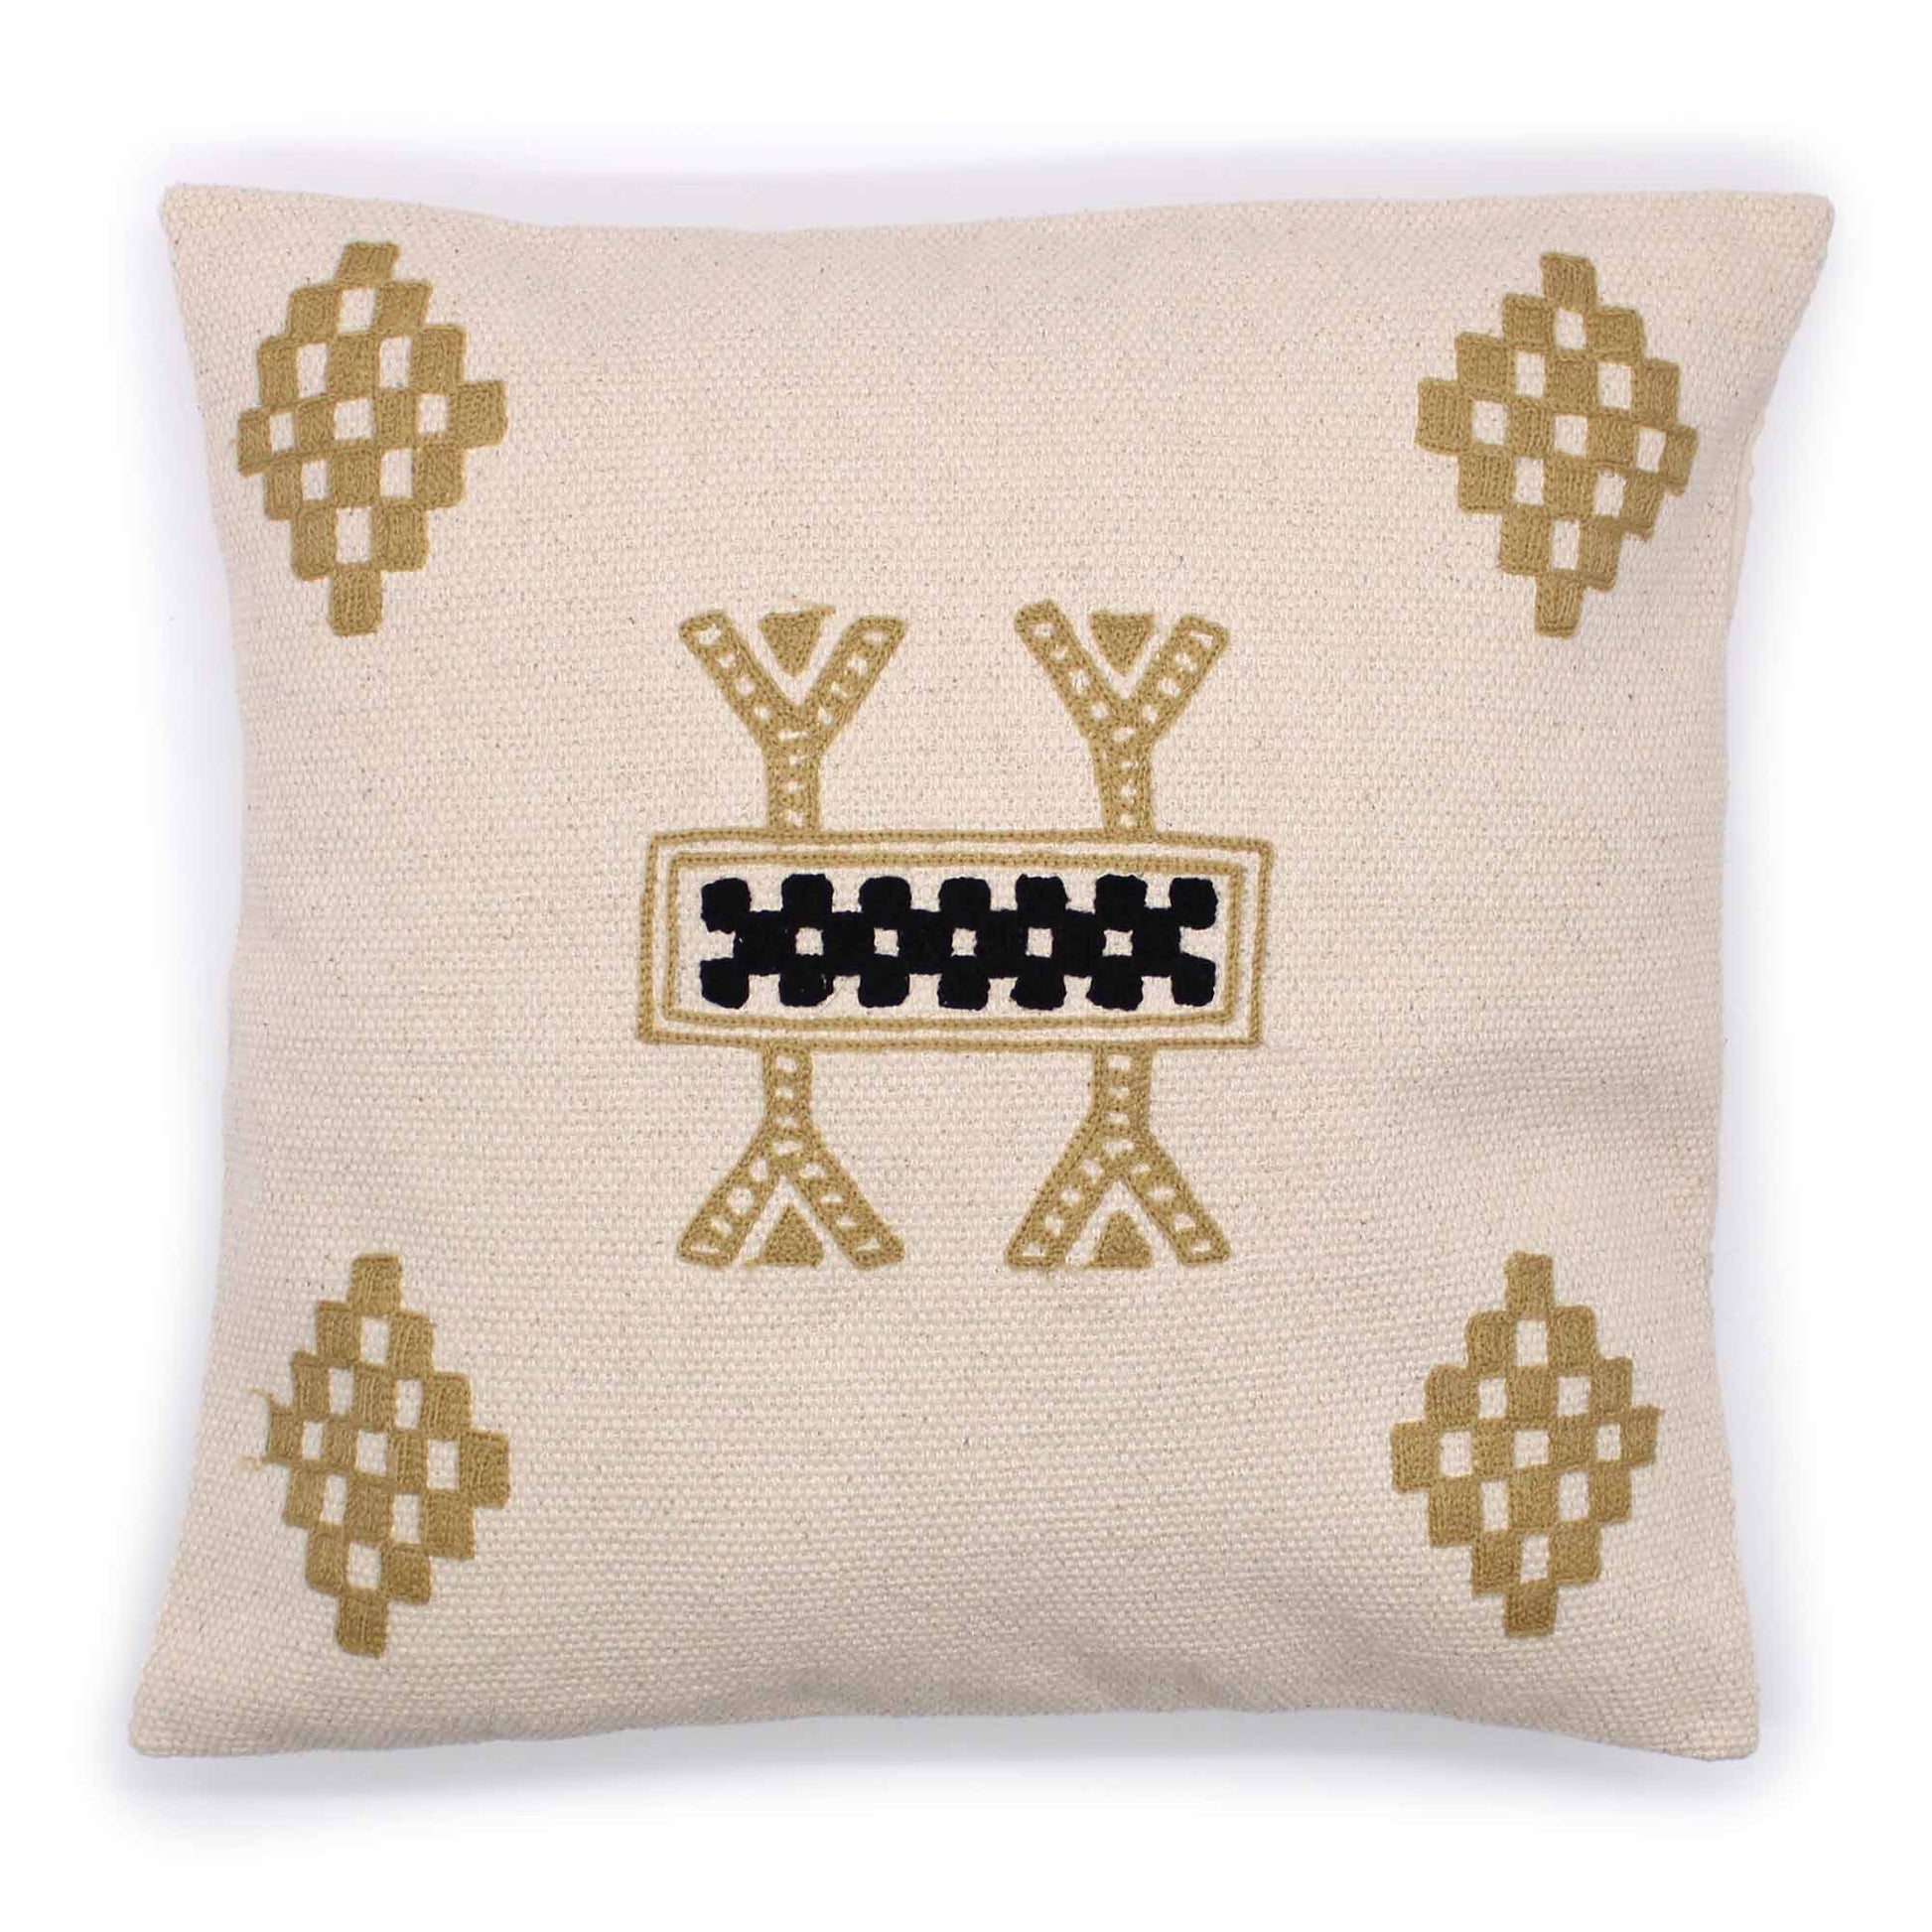 Indian Classic Throw Pillow Covers | 40 x 40 cm and 45x45 cm - Pack of 2 - Premium Cusion Cover - Shop now at San Rocco Italia